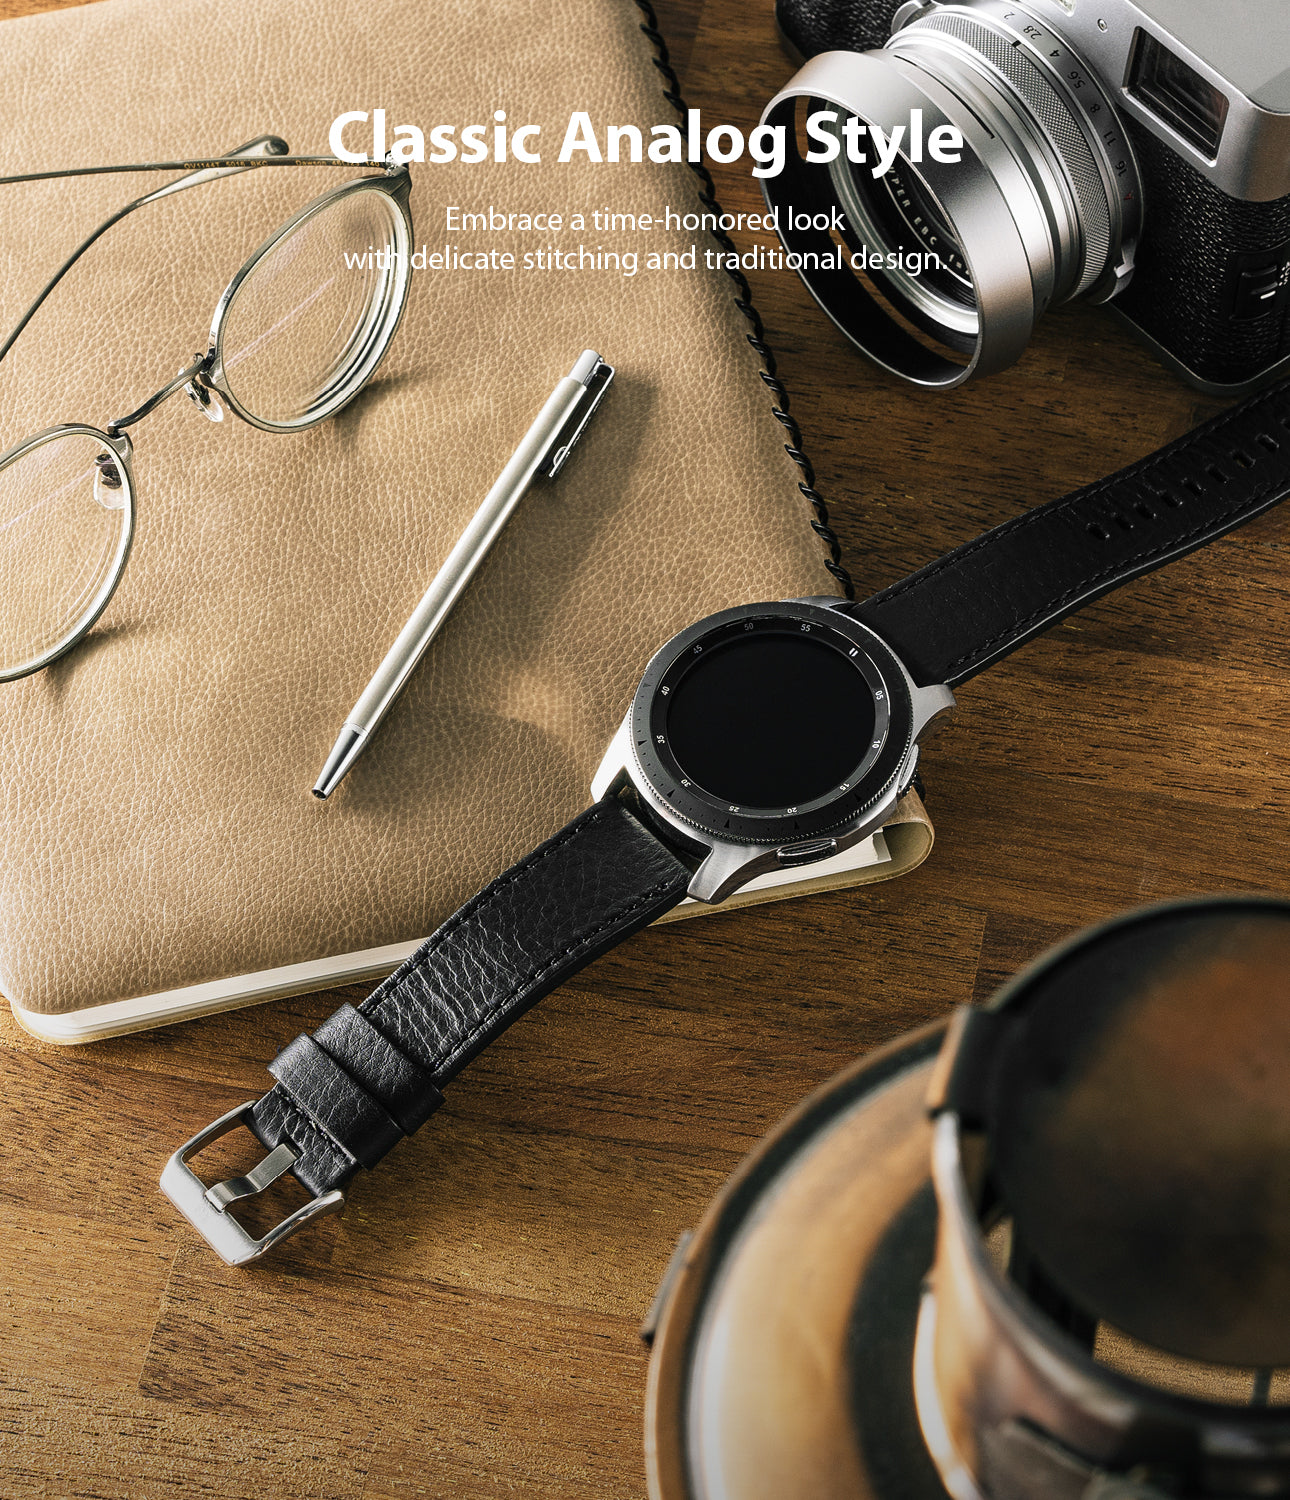 classic analog style - embradce a time-honored look with delicate stitching and traditional design